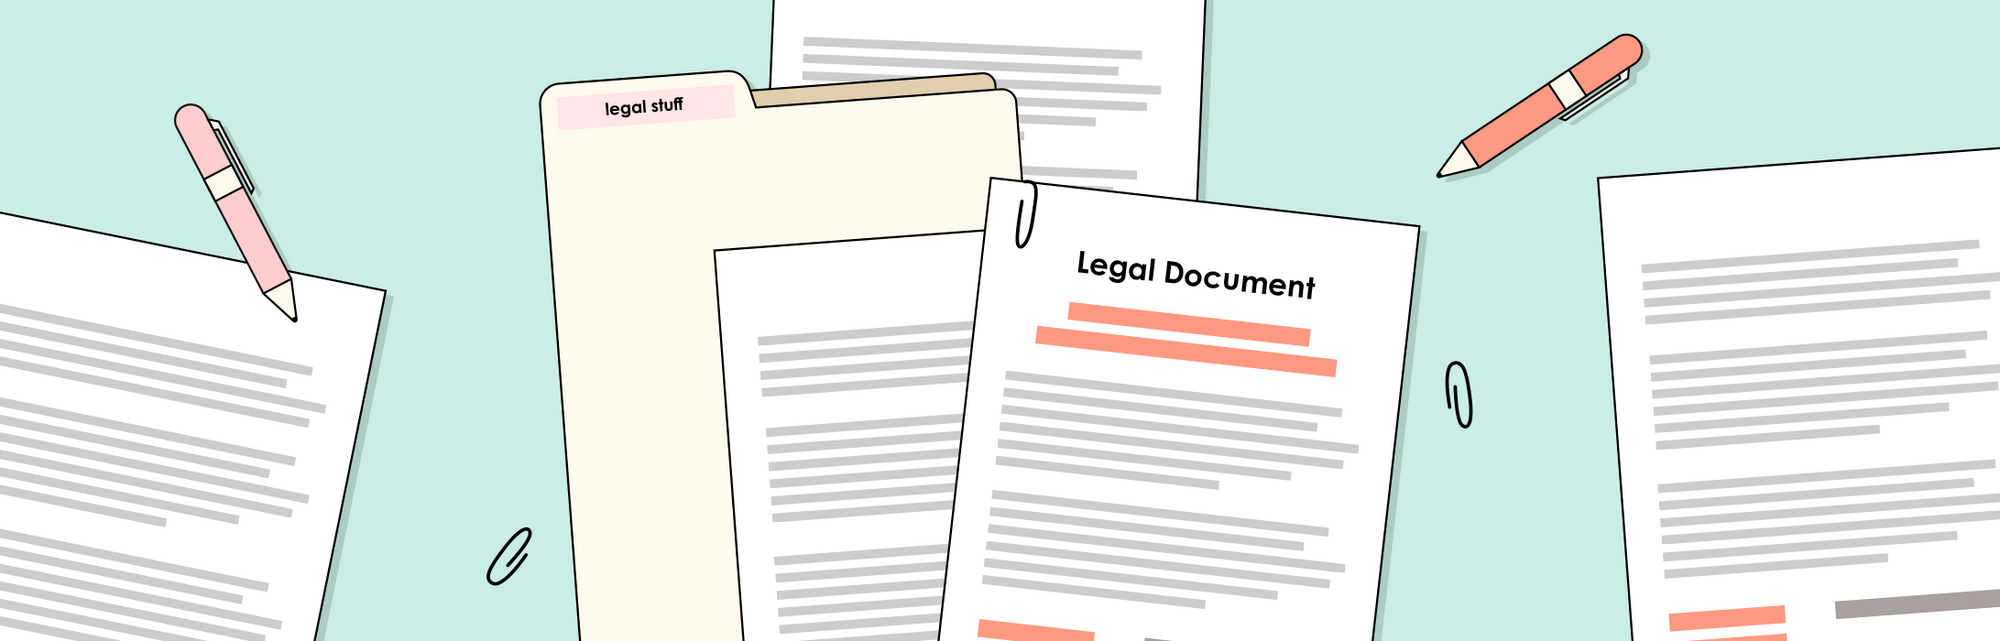 Starting a Small Business? Here's What They Don't Tell You About the Legal Stuff